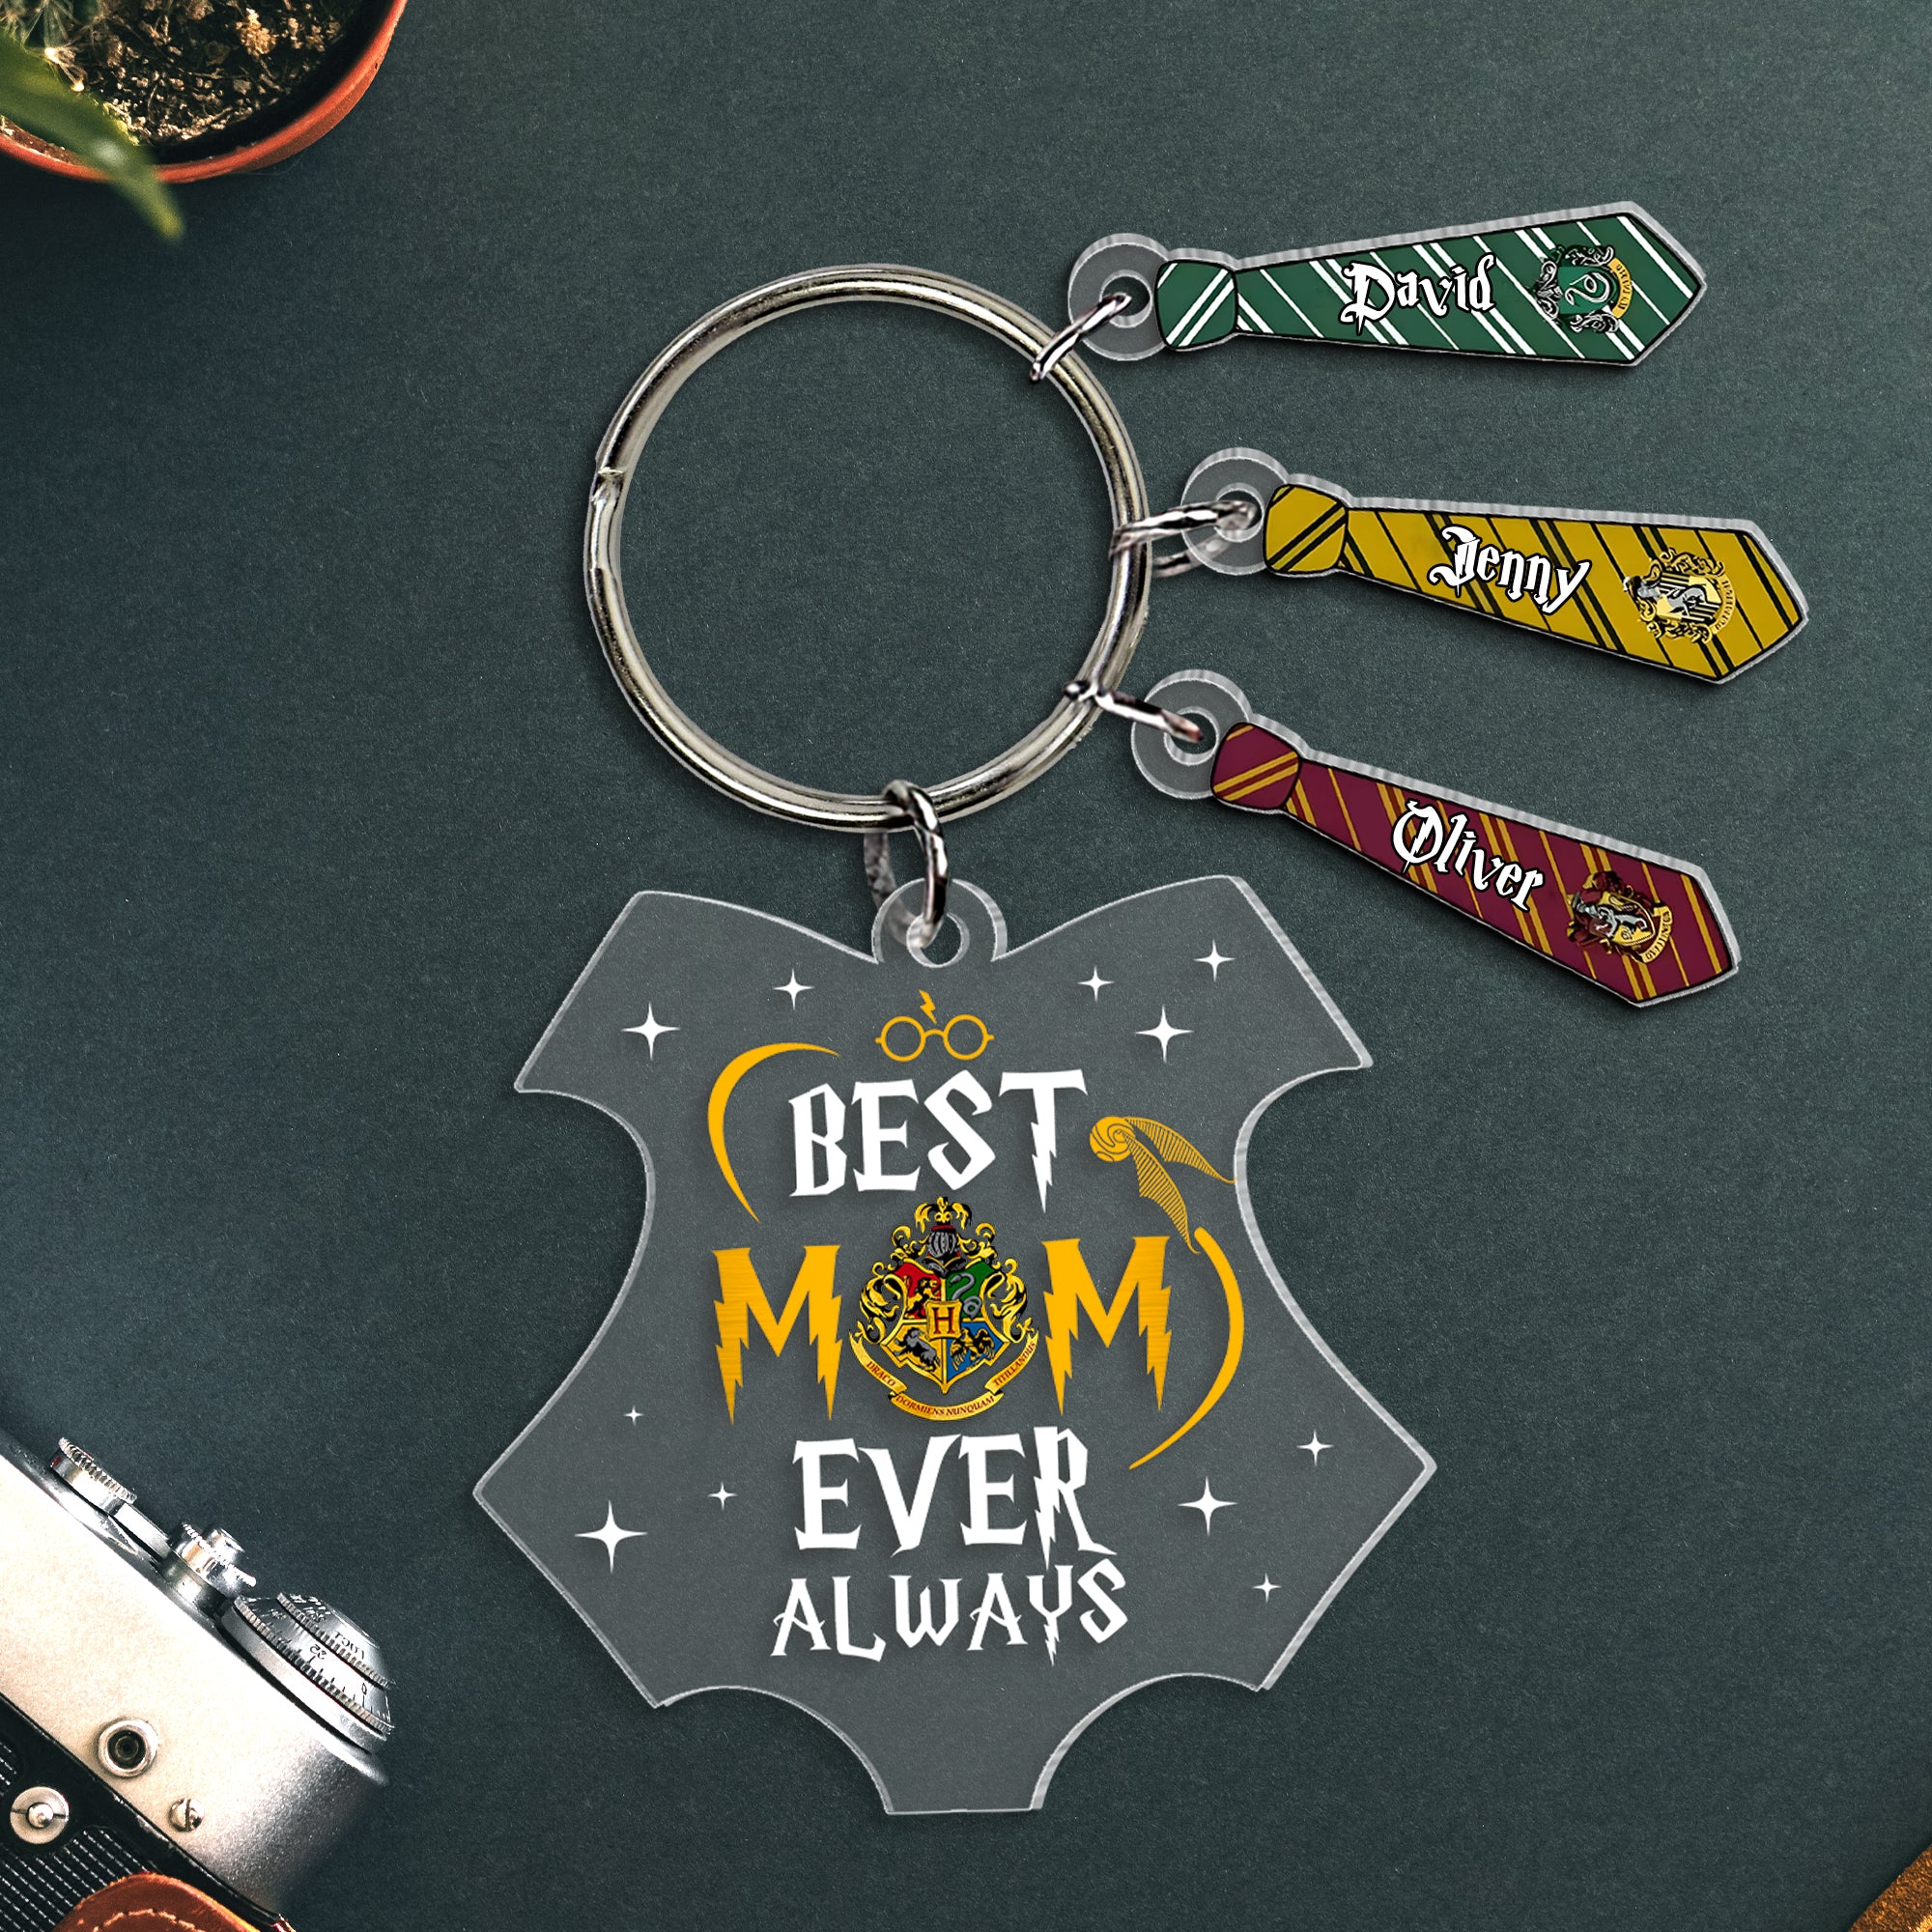 Personalized Gifts For Mom Keychain 03ohtn110424 Mother's Day-Homacus